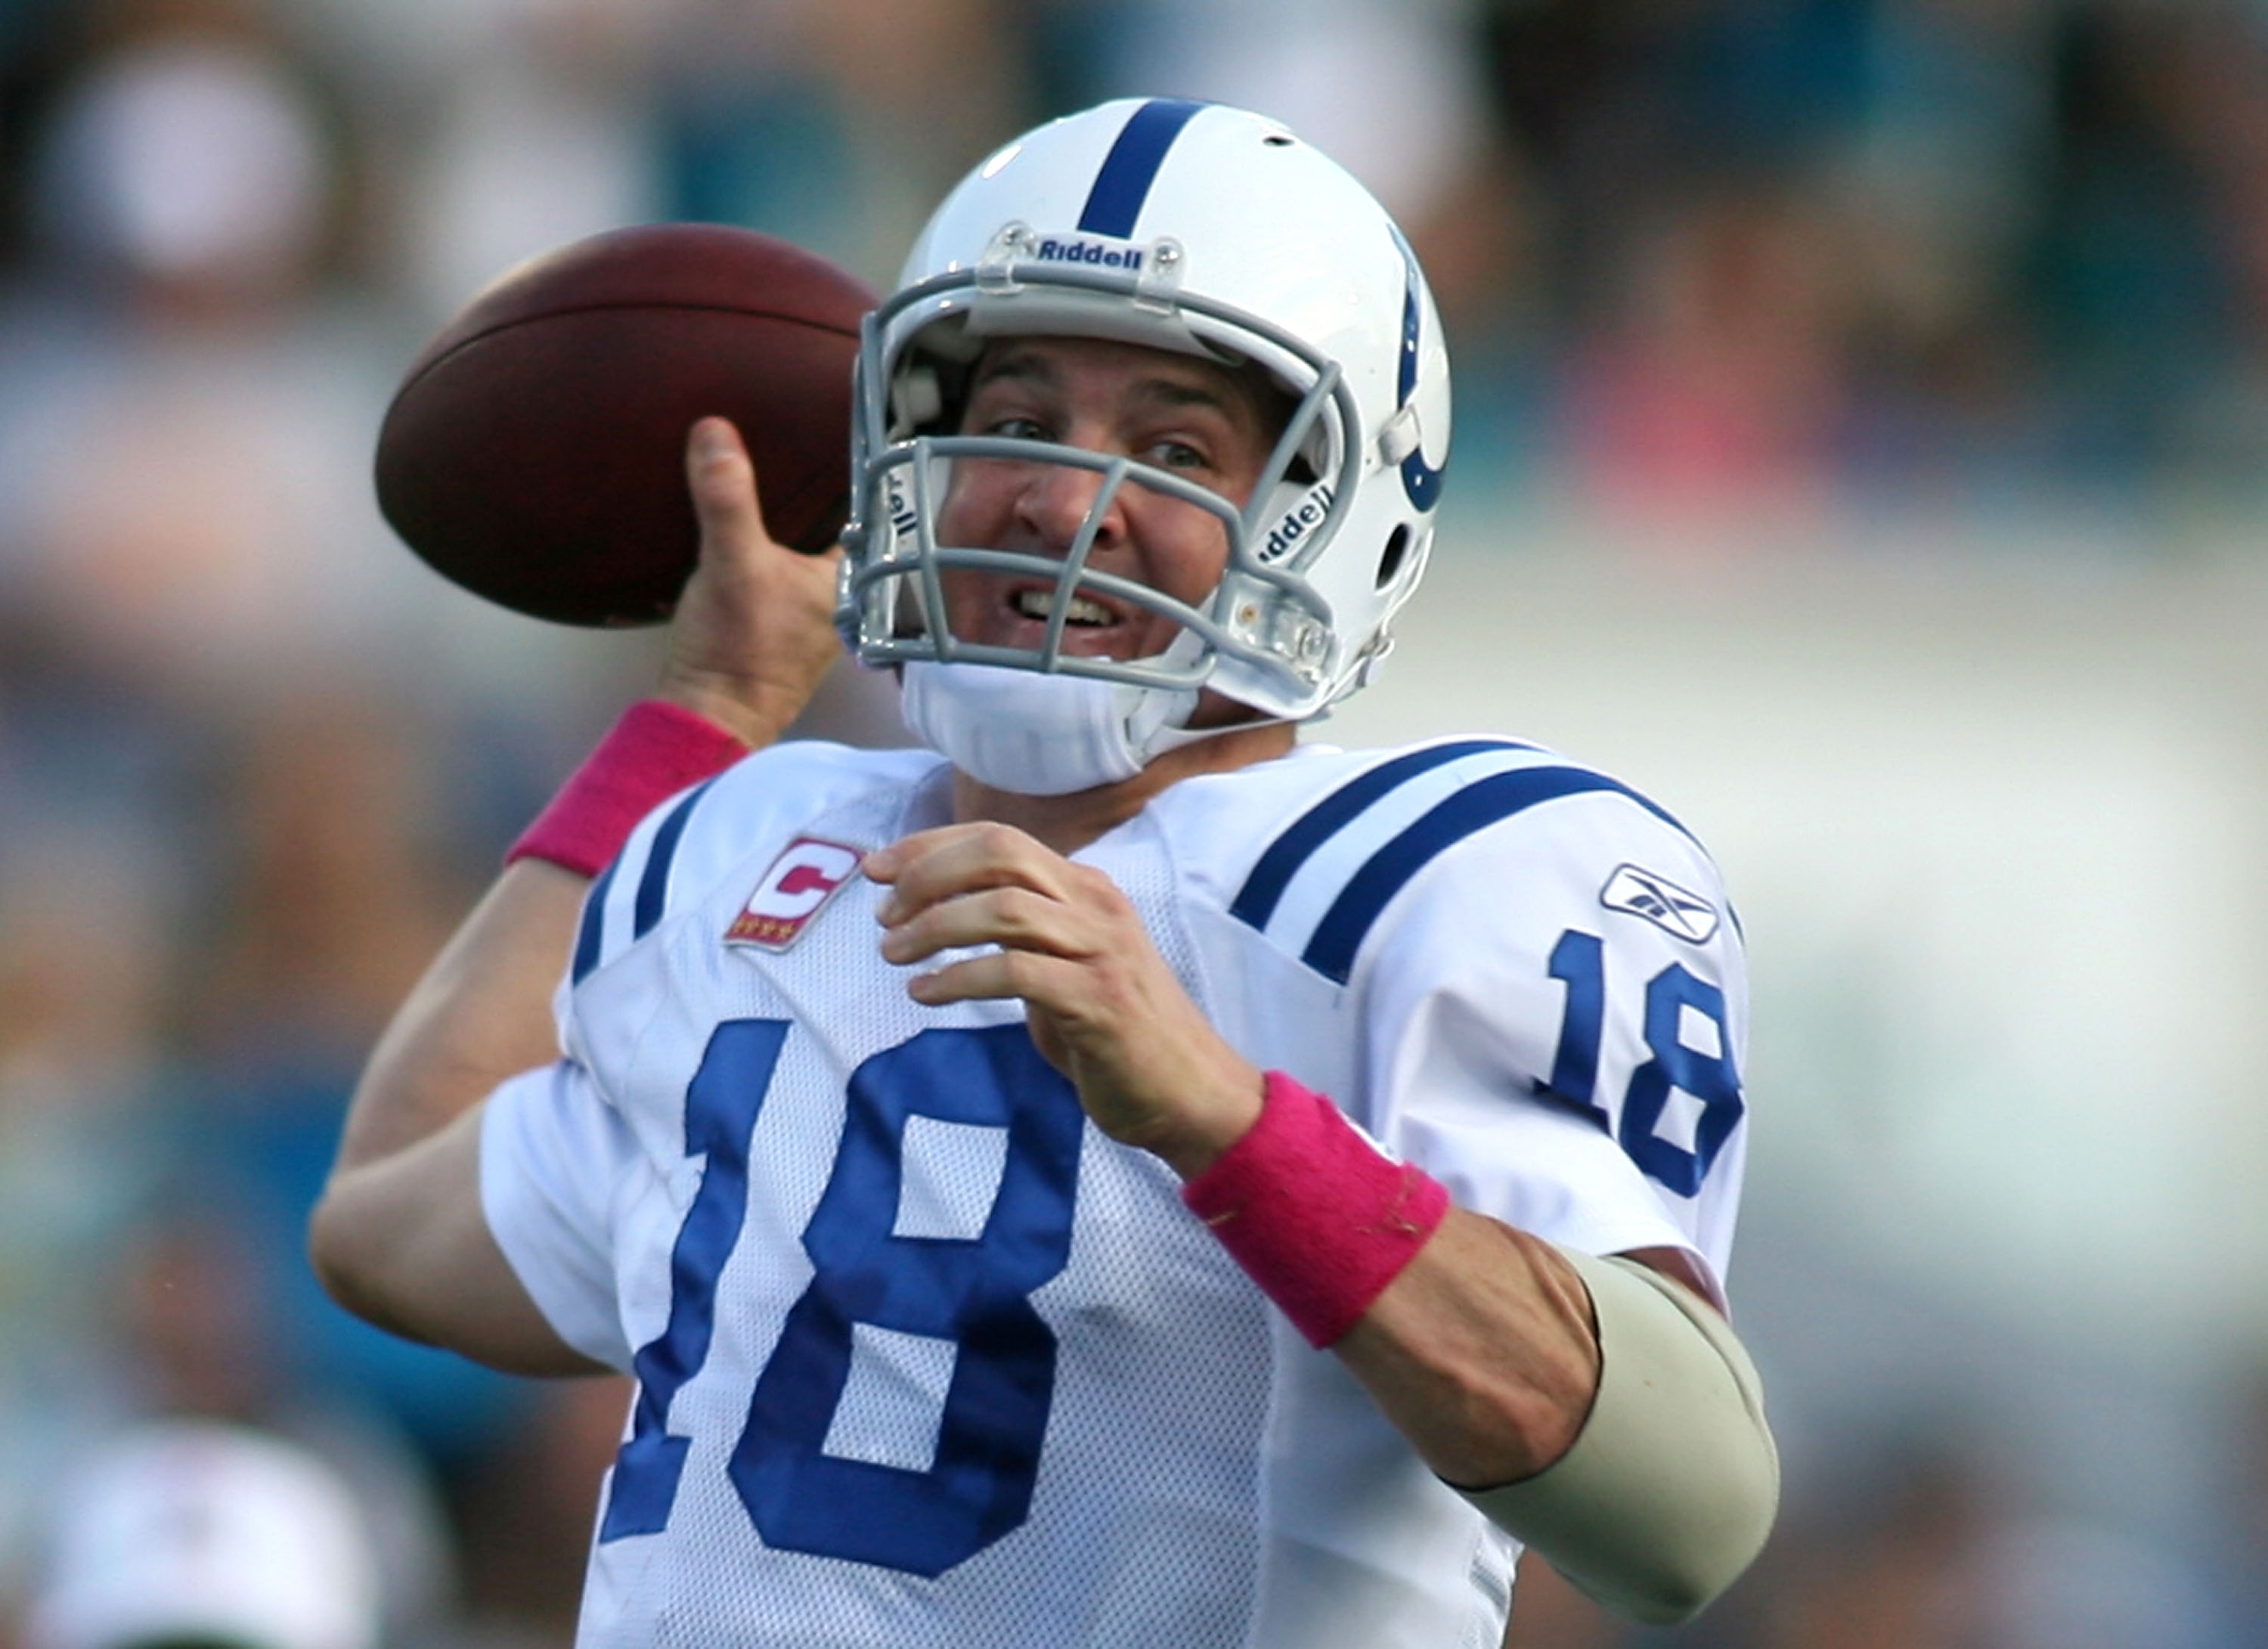 The Colts' running game has struggled all season, putting Indy's post-season hopes on Manning yet again